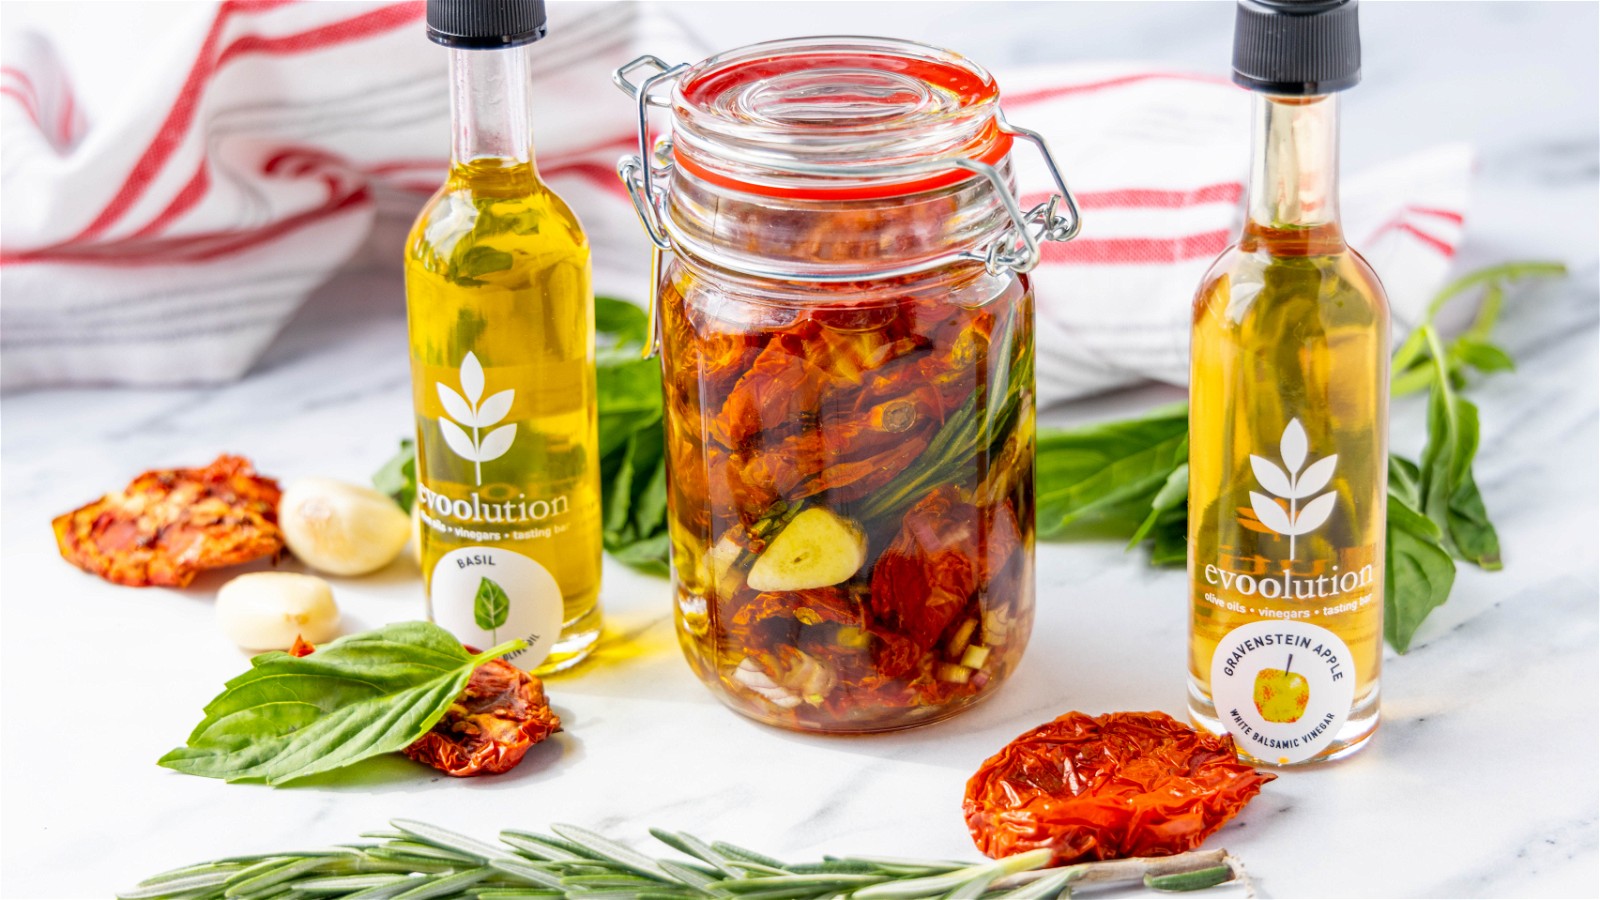 Image of Marinated Sun-Dried Tomatoes with Basil and Gravenstein Apple